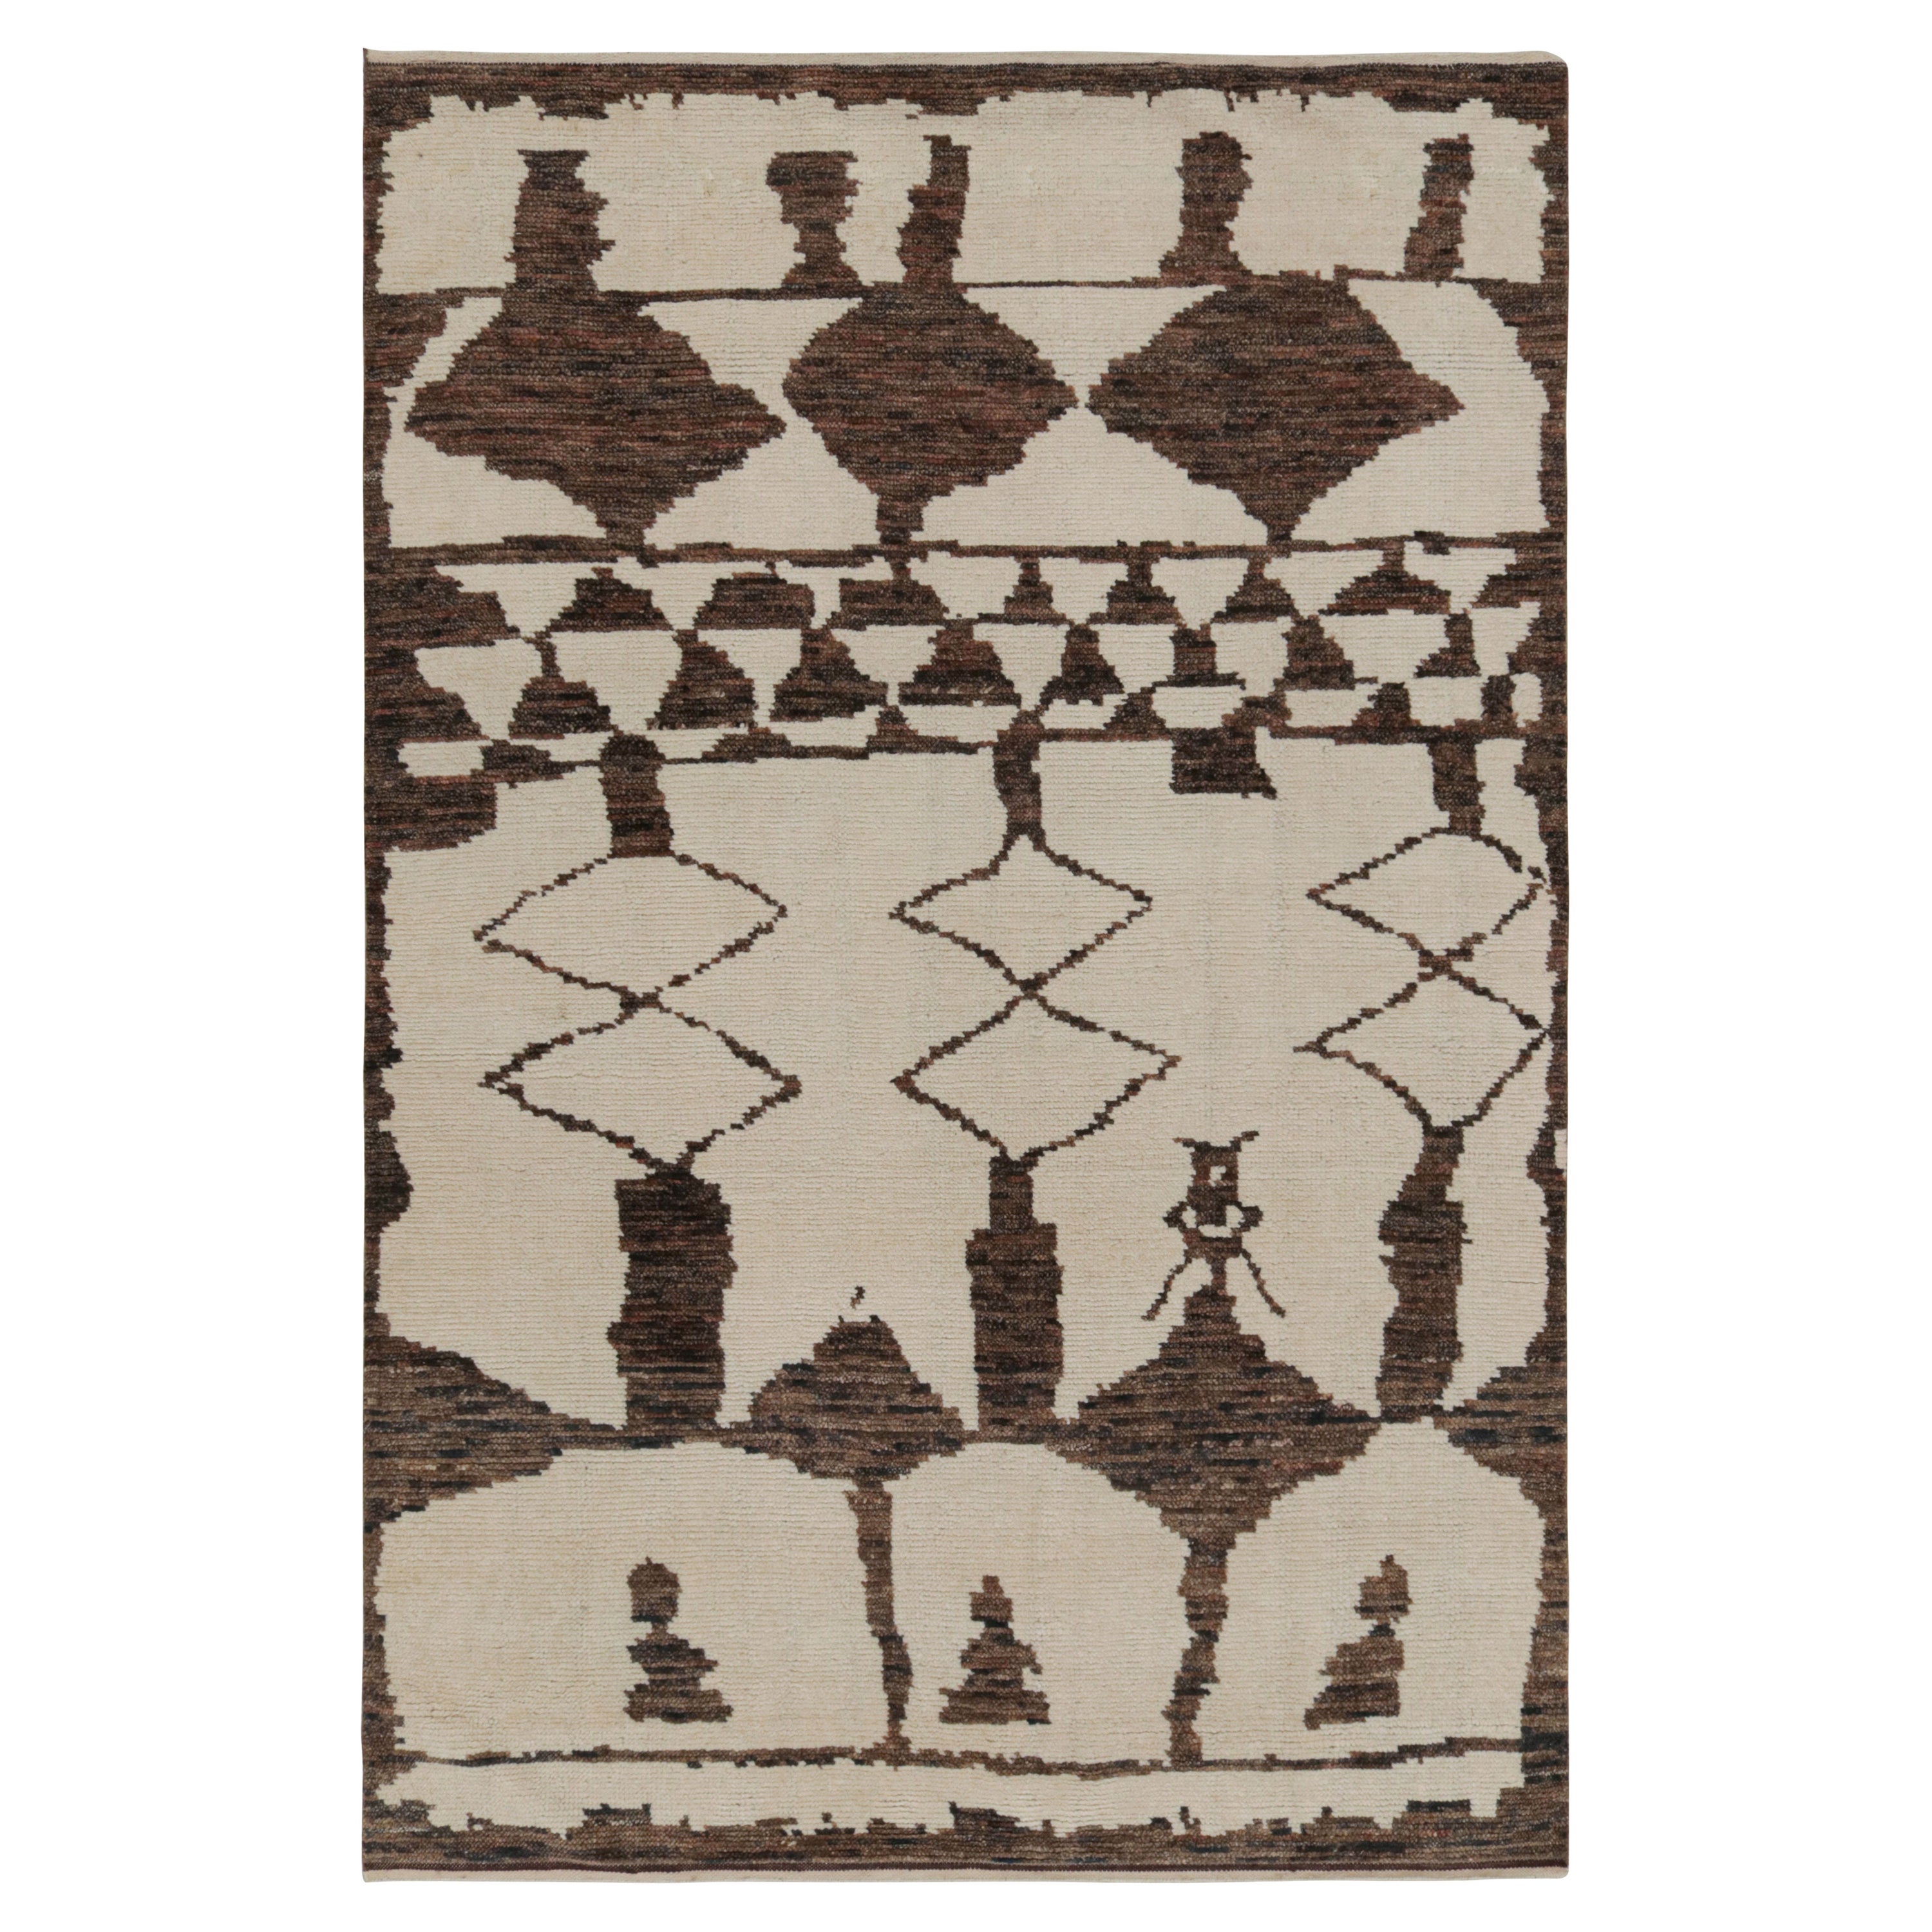 Rug & Kilim's Contemporary Moroccan Style Geometric Rug in Beige-Brown